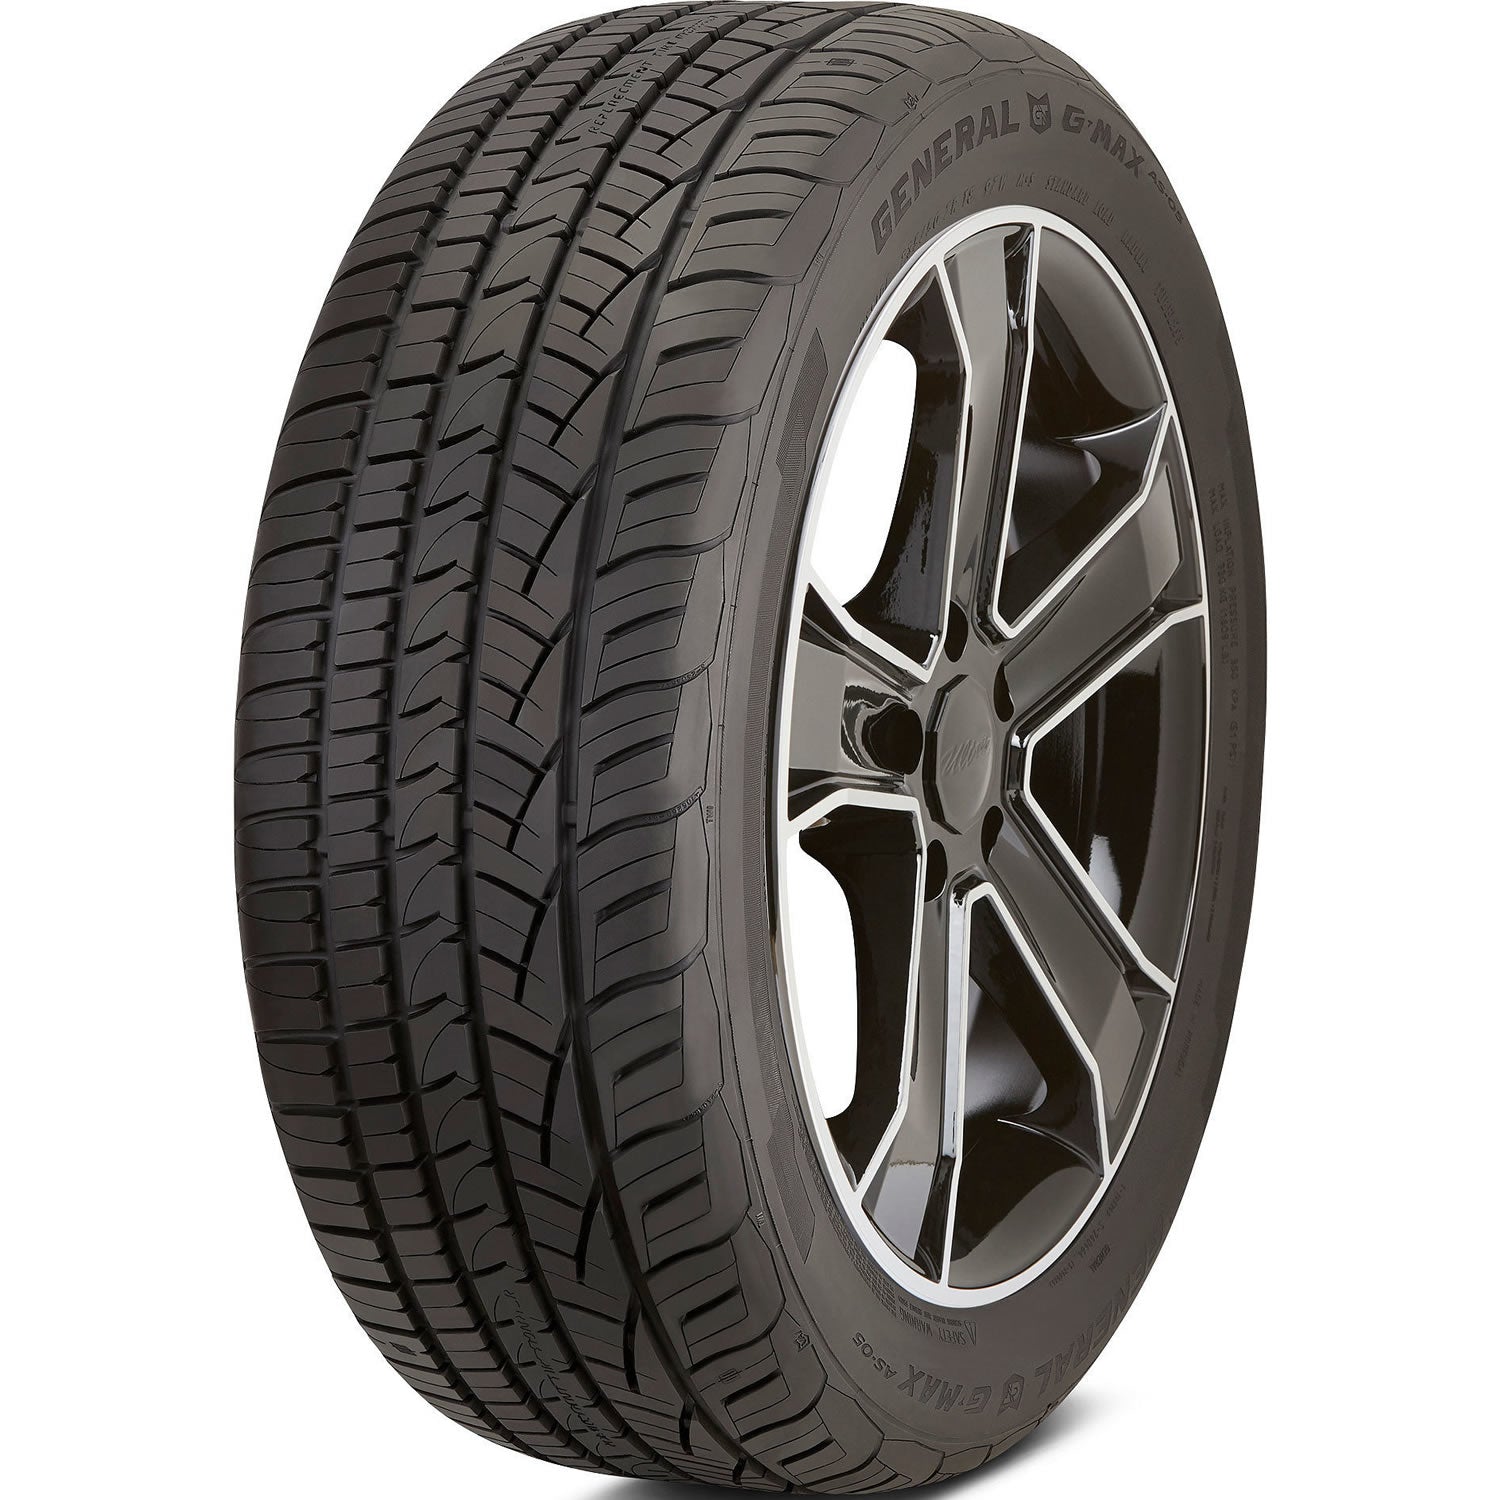 GENERAL G-MAX AS-05 255/45ZR18 (27X10R 18) Tires